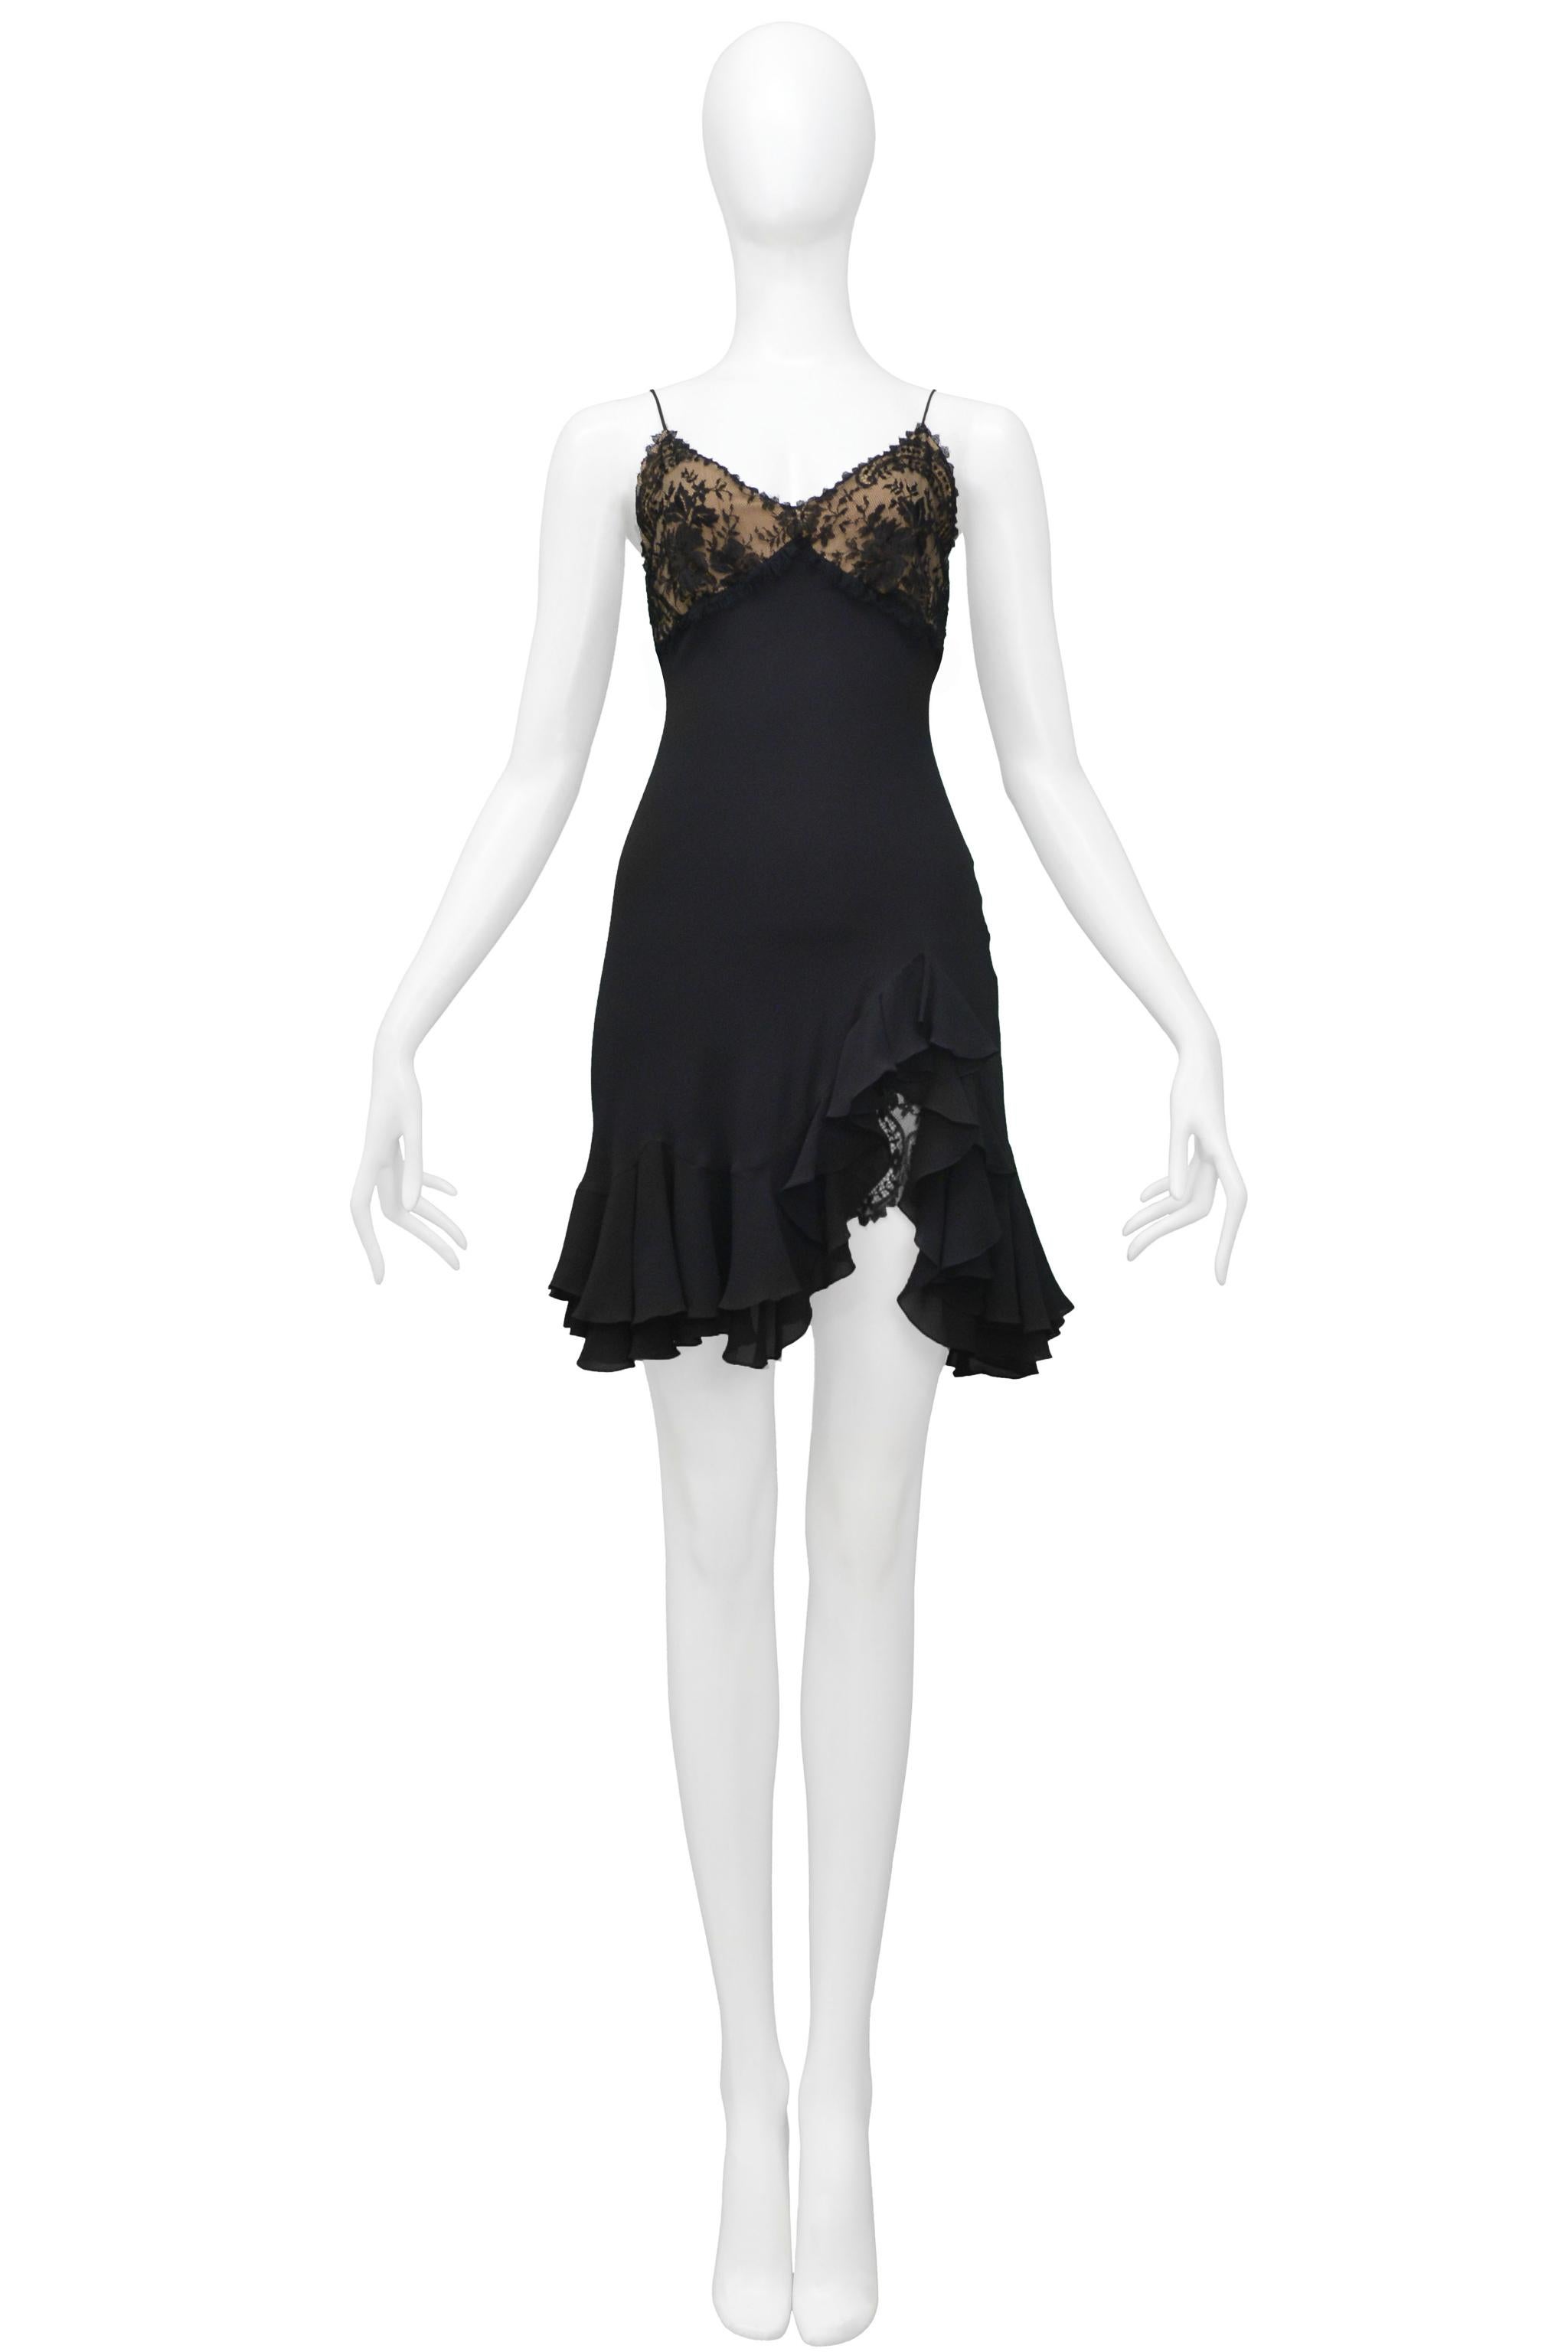 Resurrection is excited to offer a stunning vintage John Galliano black slip dress featuring a black lace bodice with nude lining, side front slip, and ruffles. From the 1997 collection.

John Galliano
Size 40
95% Silk, 5%Viscose
1997 Runway